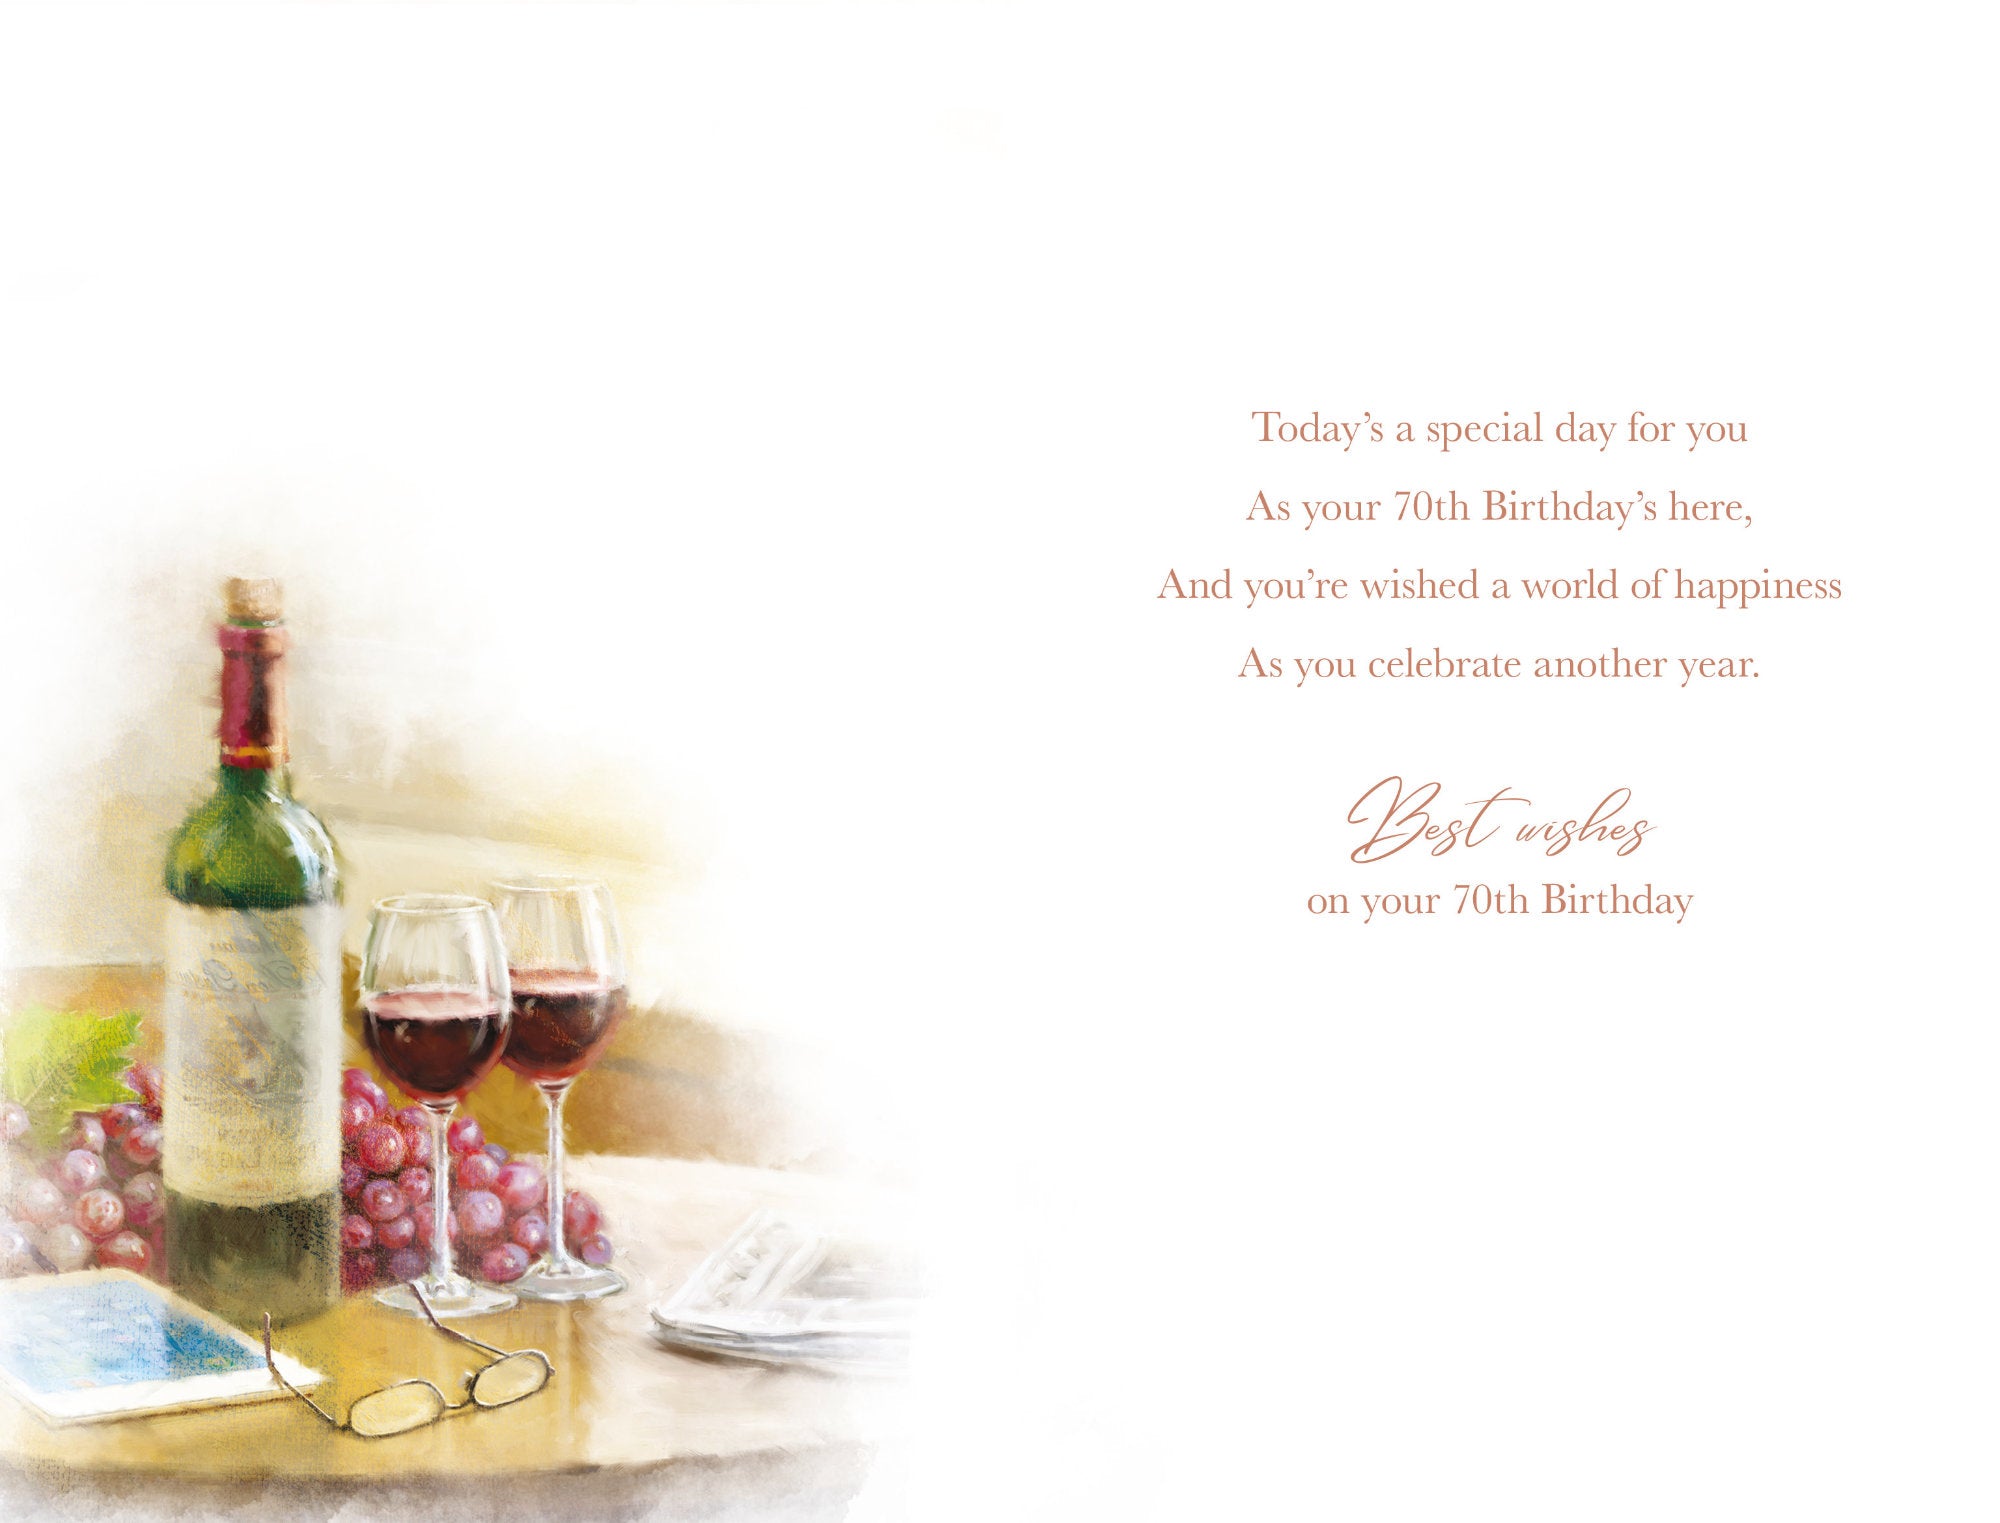 Inside of Your 70th Birthday Wine & Glasses Card